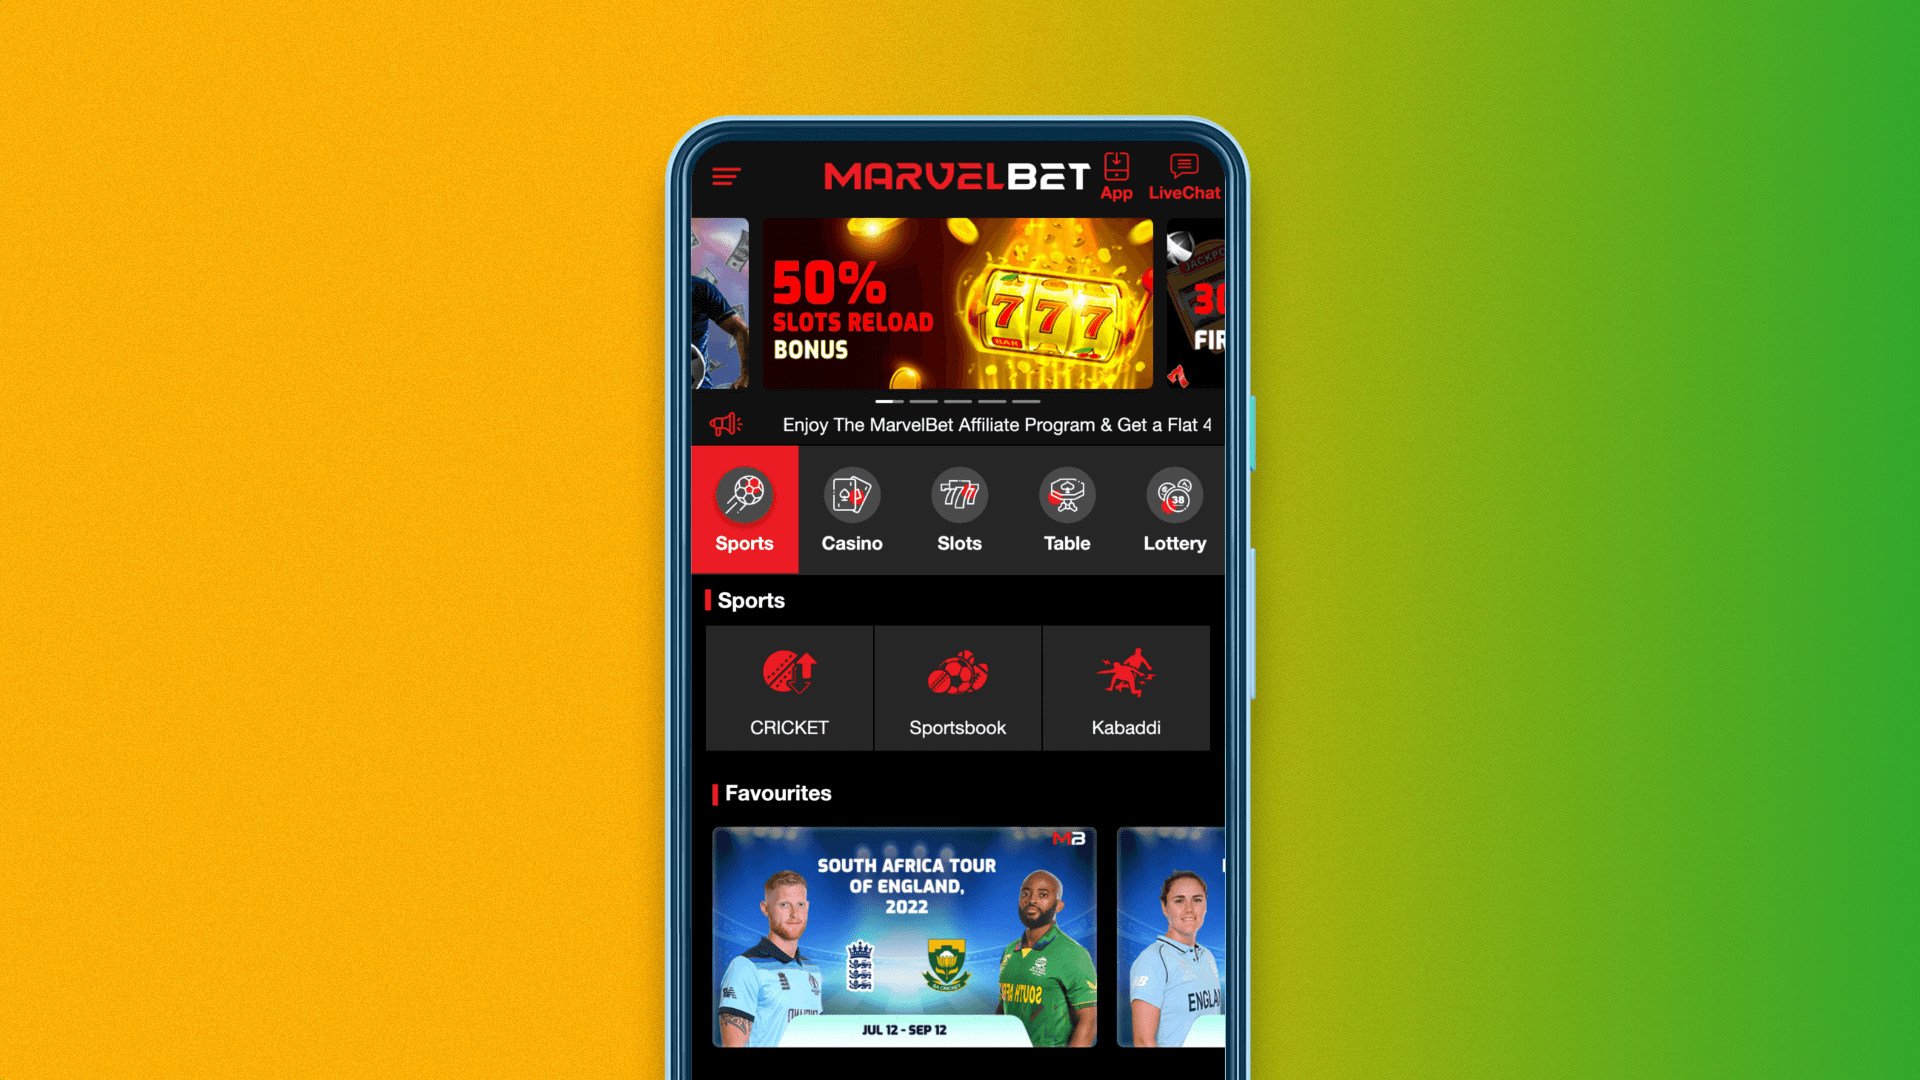 Download the Android app from Marvelbet's official website in India